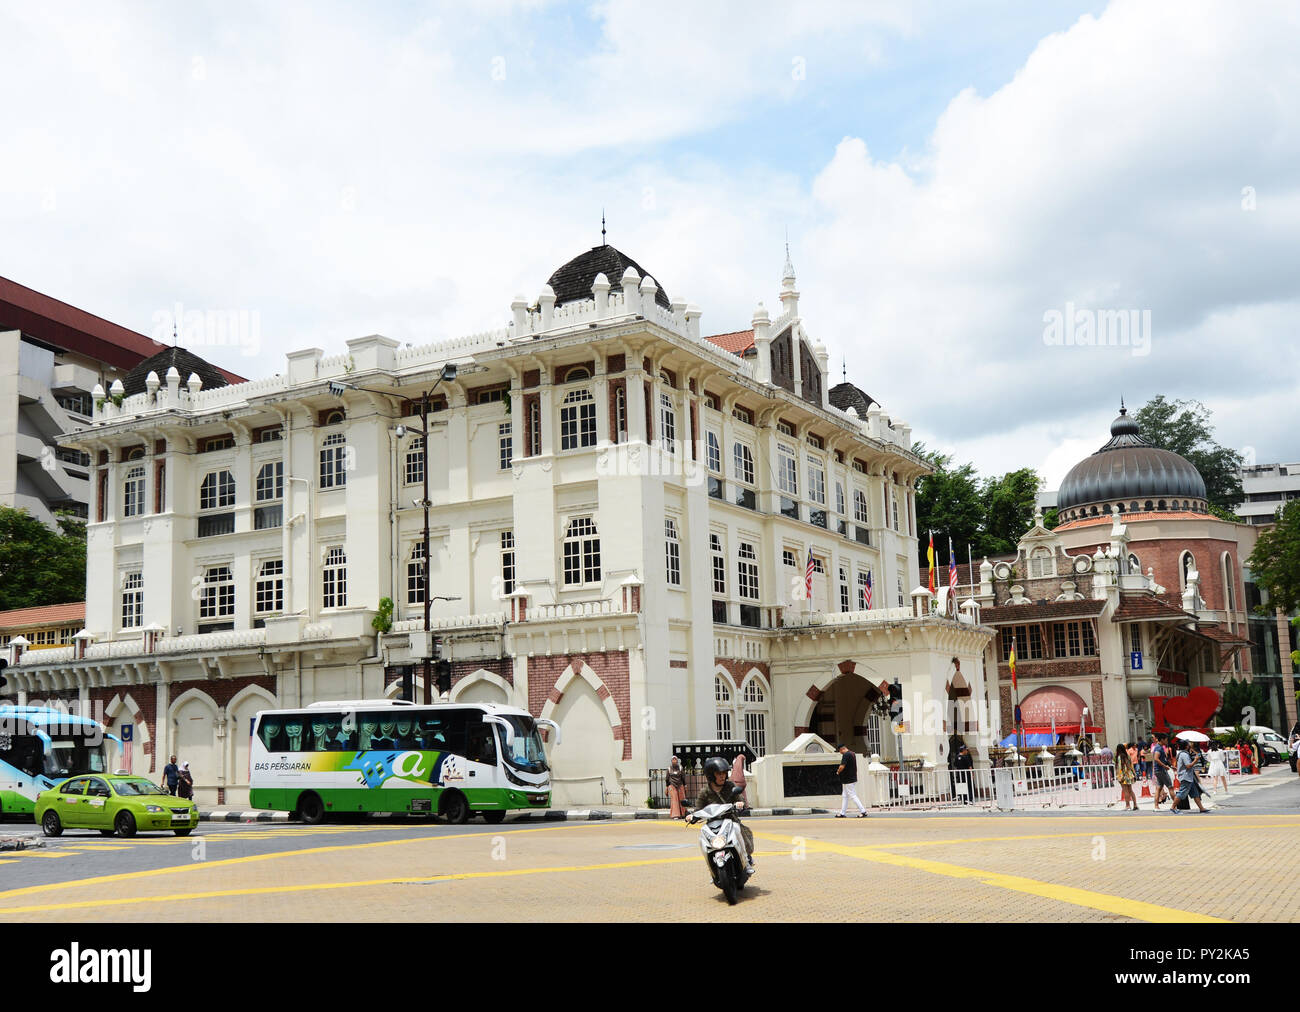 The national textile museum in KL, Malaysia. Stock Photo